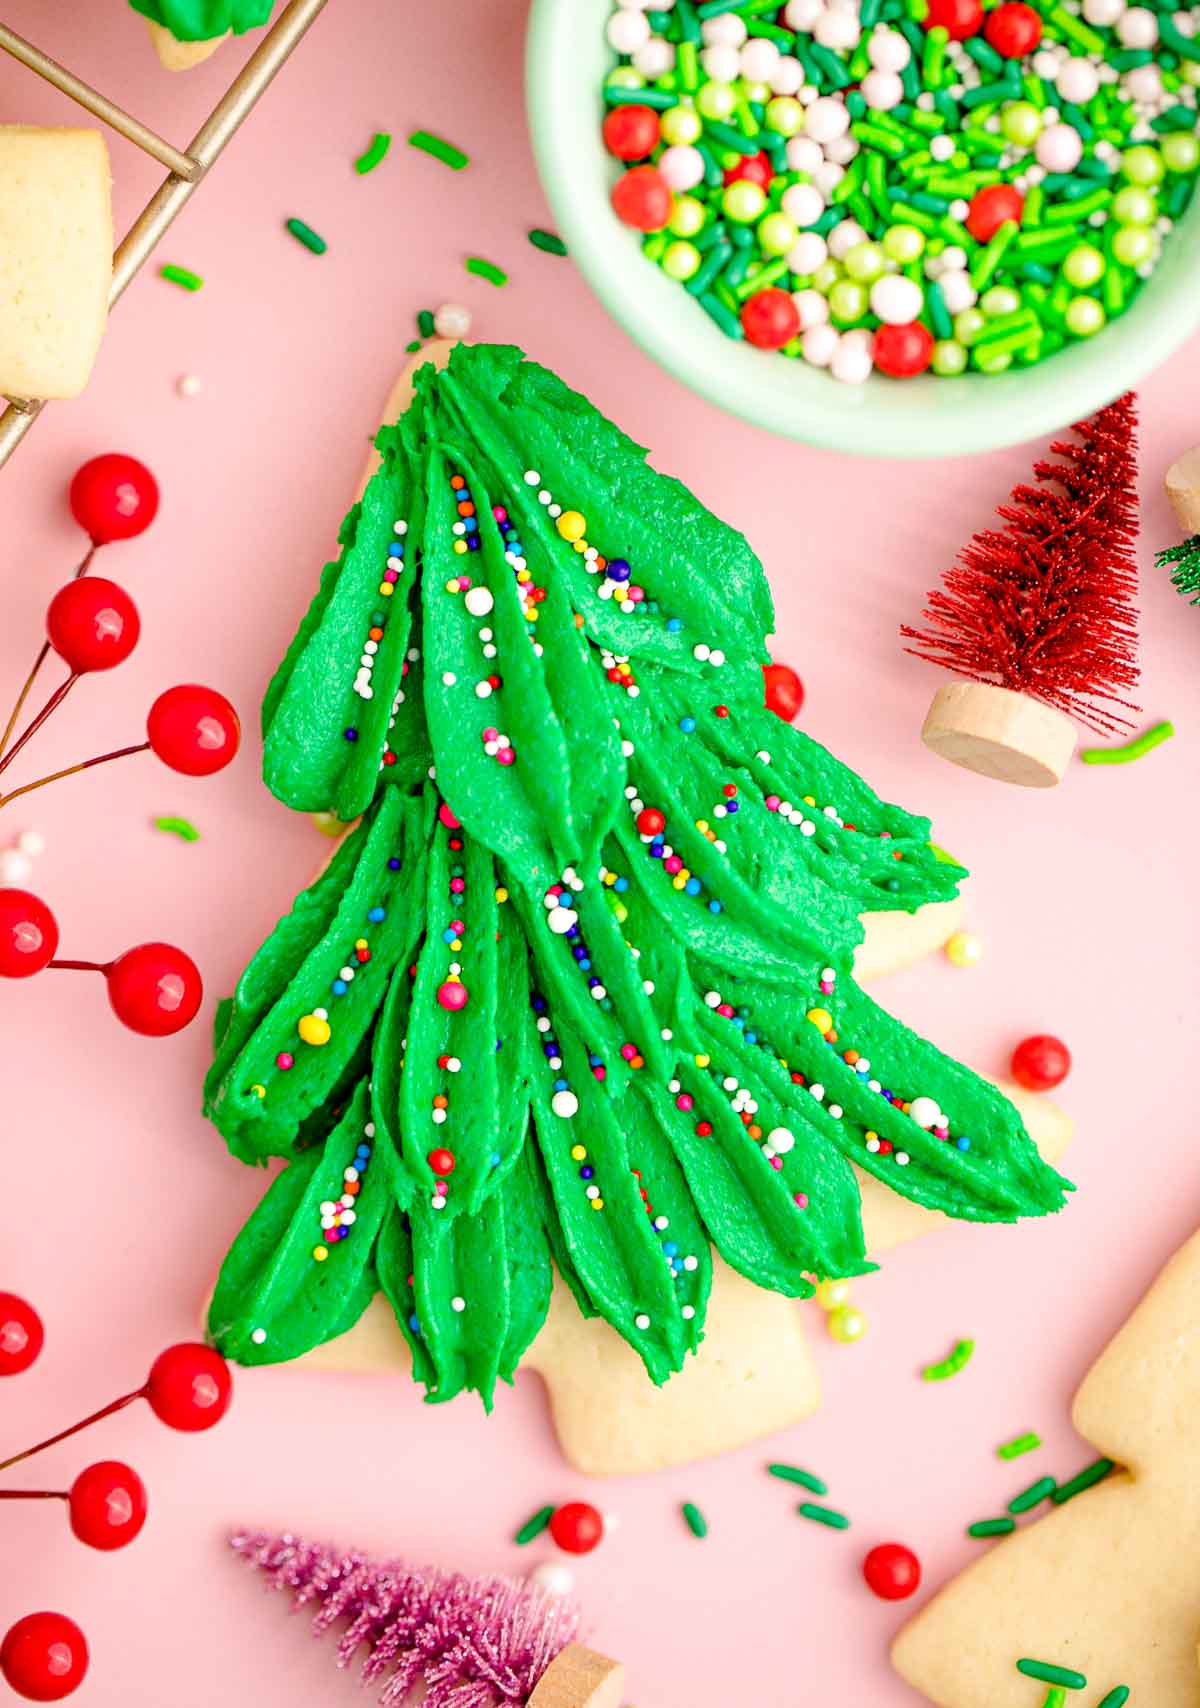 A Christmas tree cookie with sprinkles